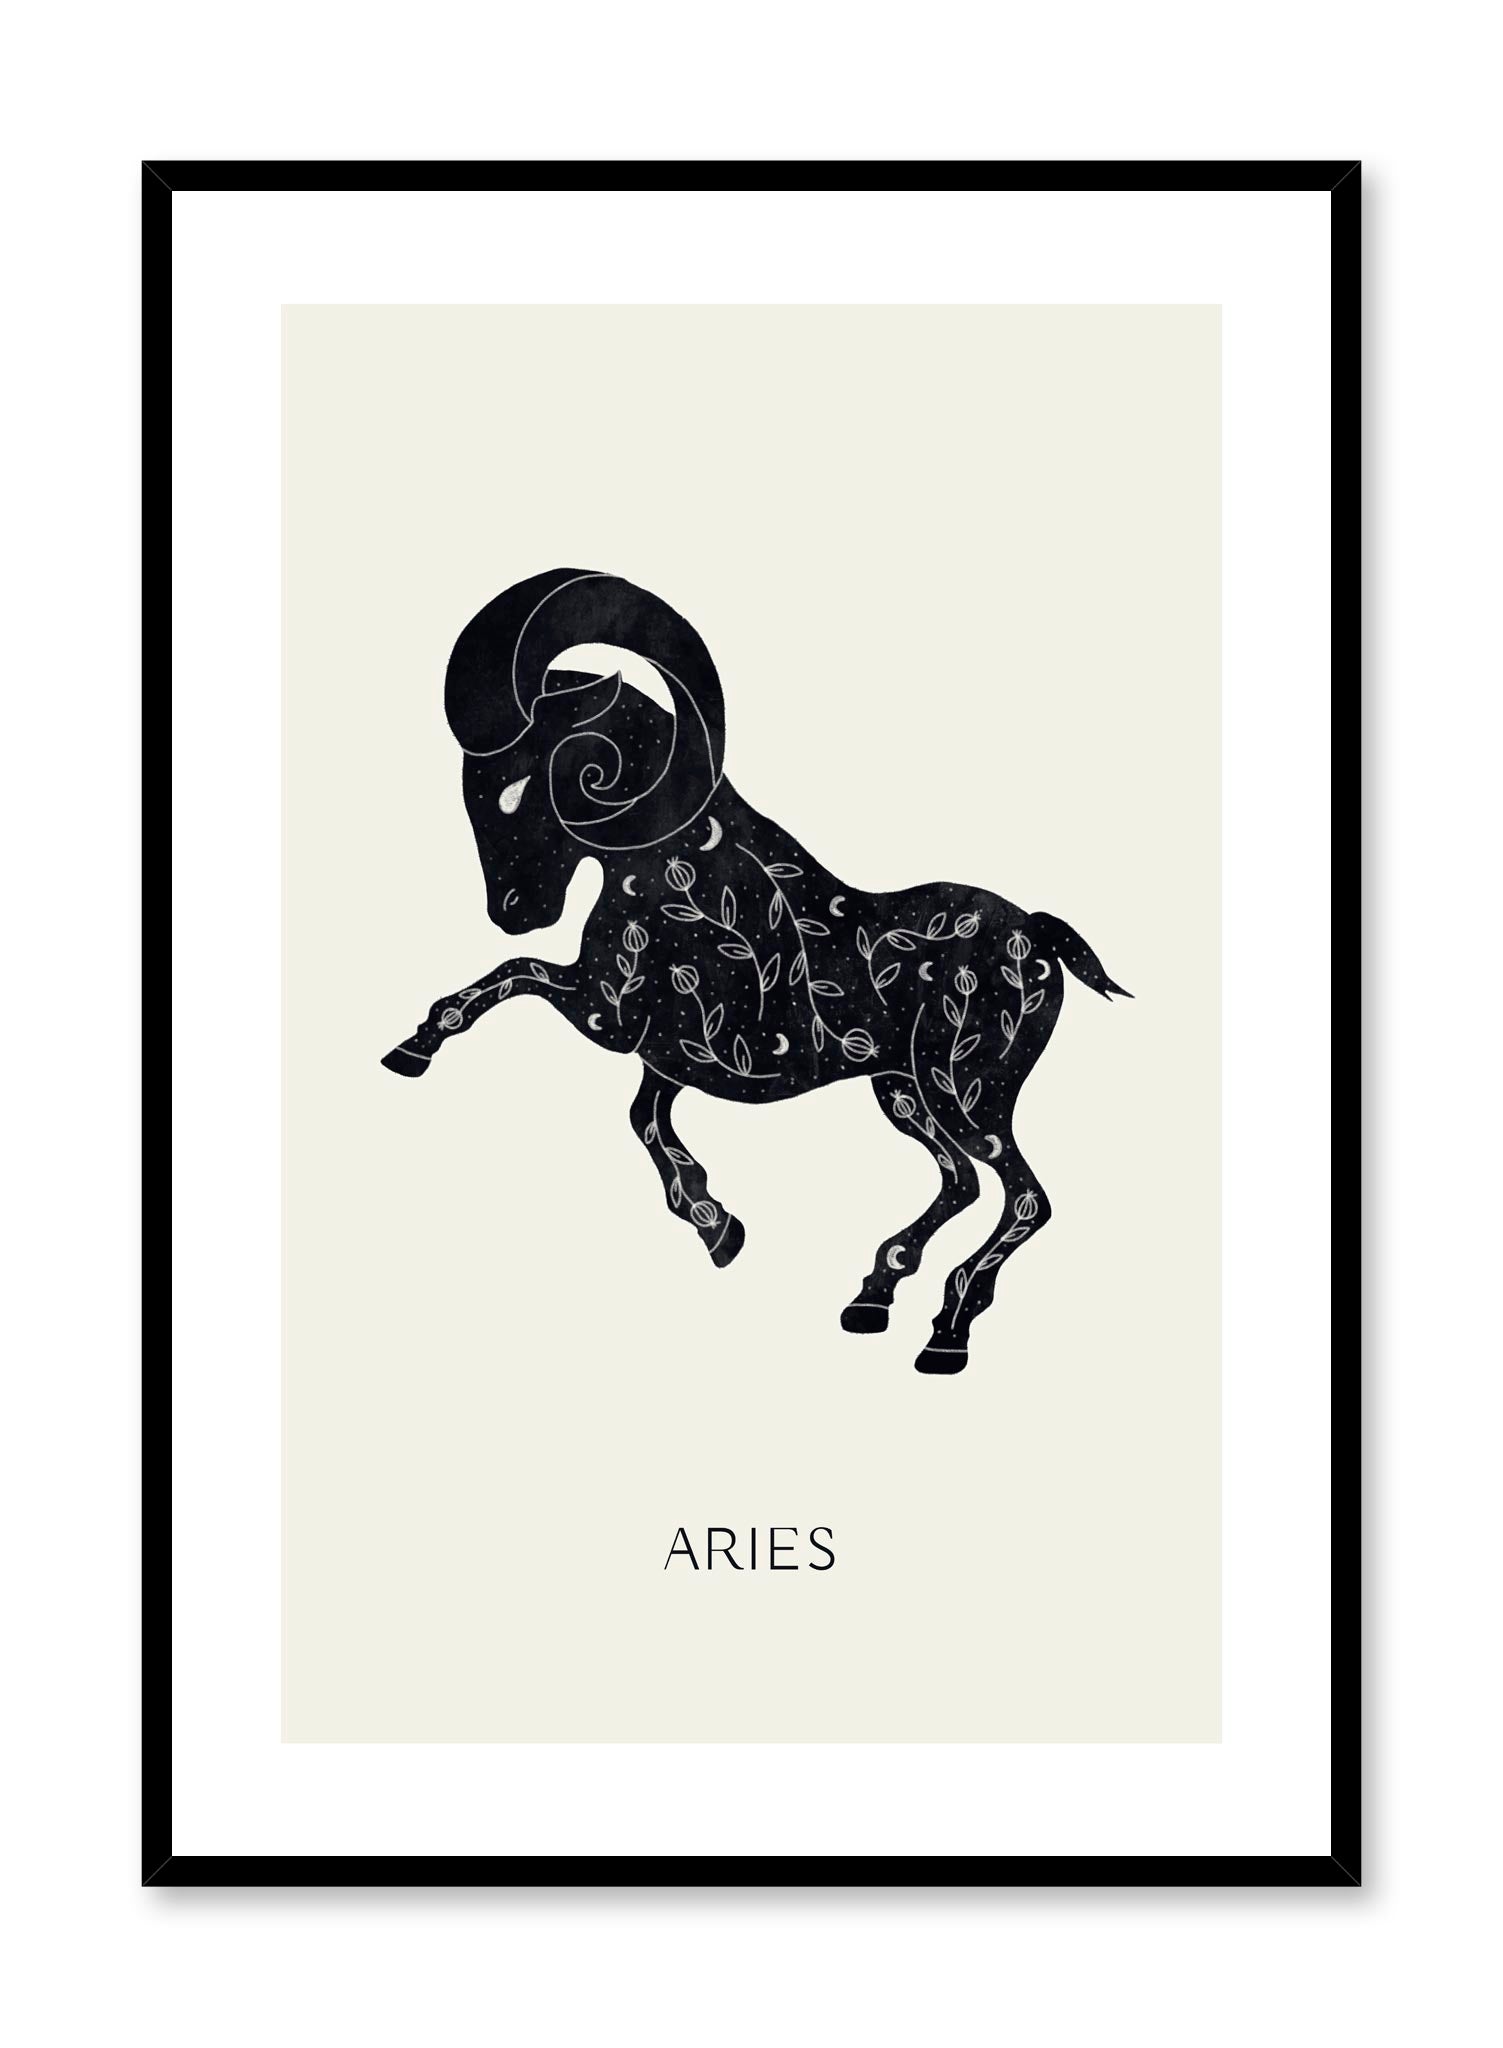 Celestial illustration poster by Opposite Wall with horoscope zodiac symbol of Aries